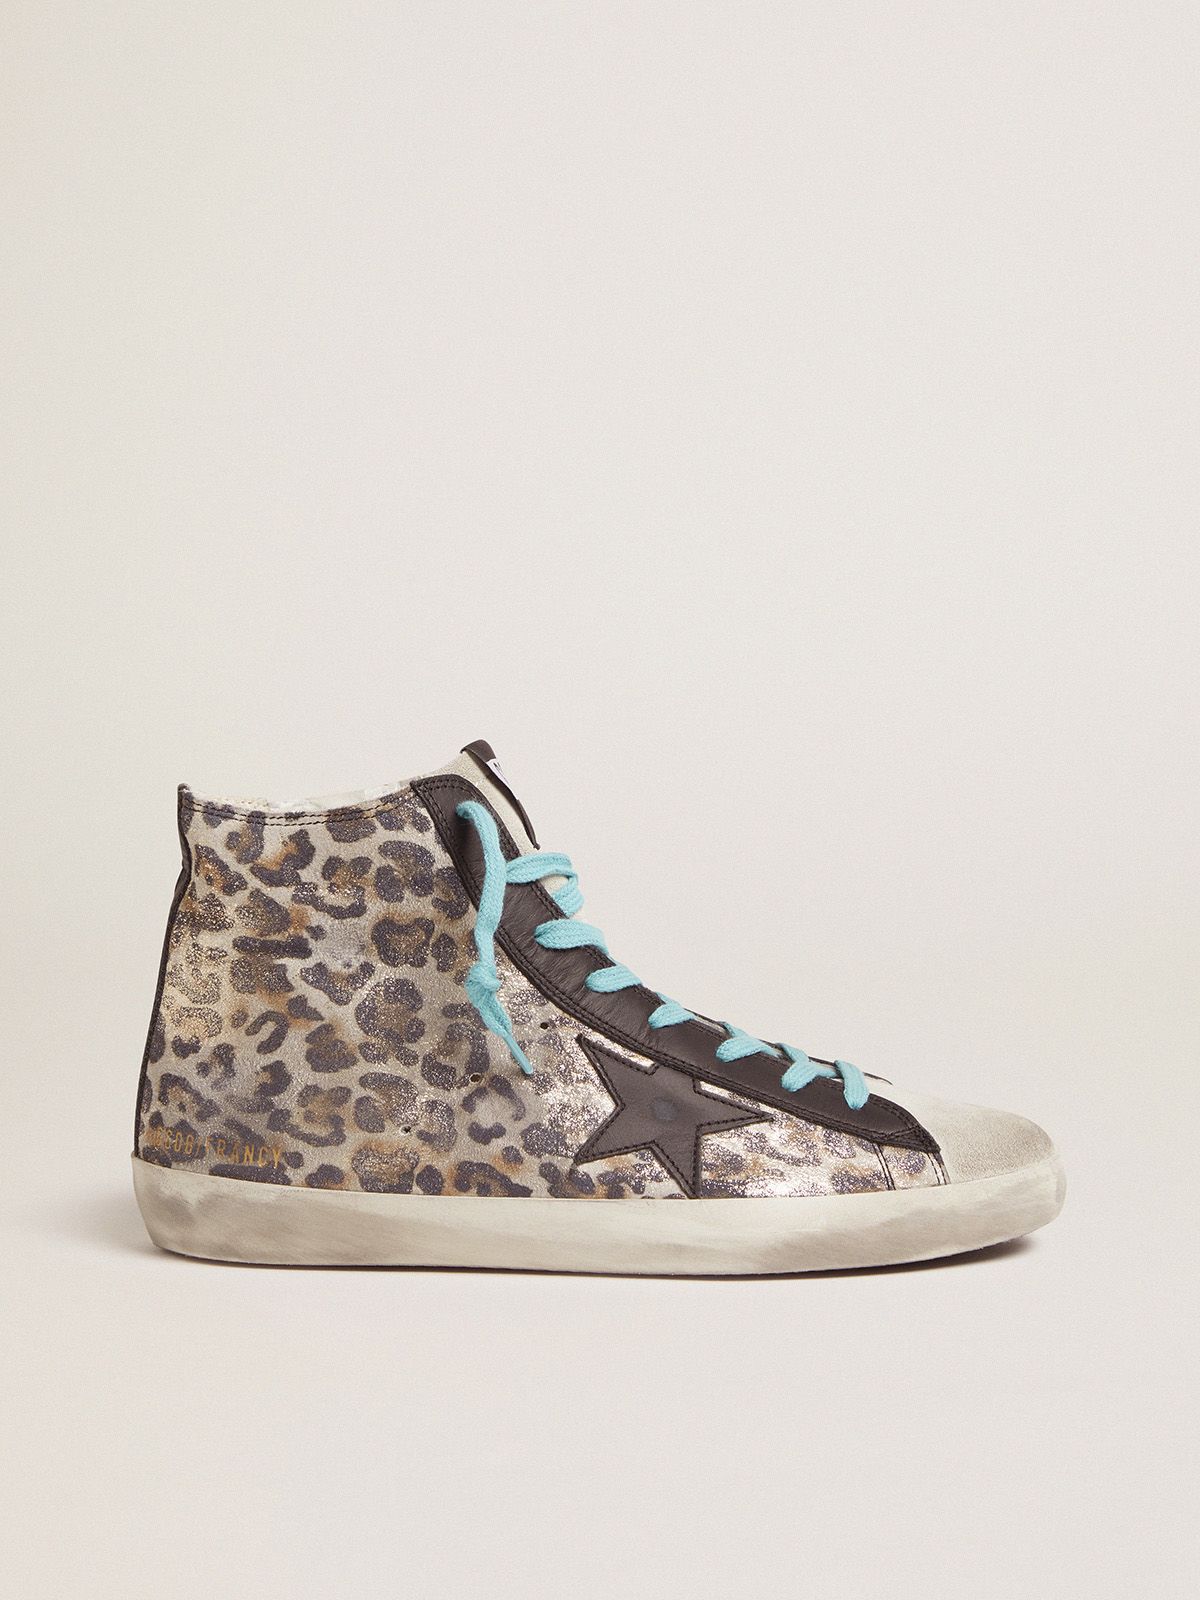 golden goose Francy sneakers laces Leopard-print blue with